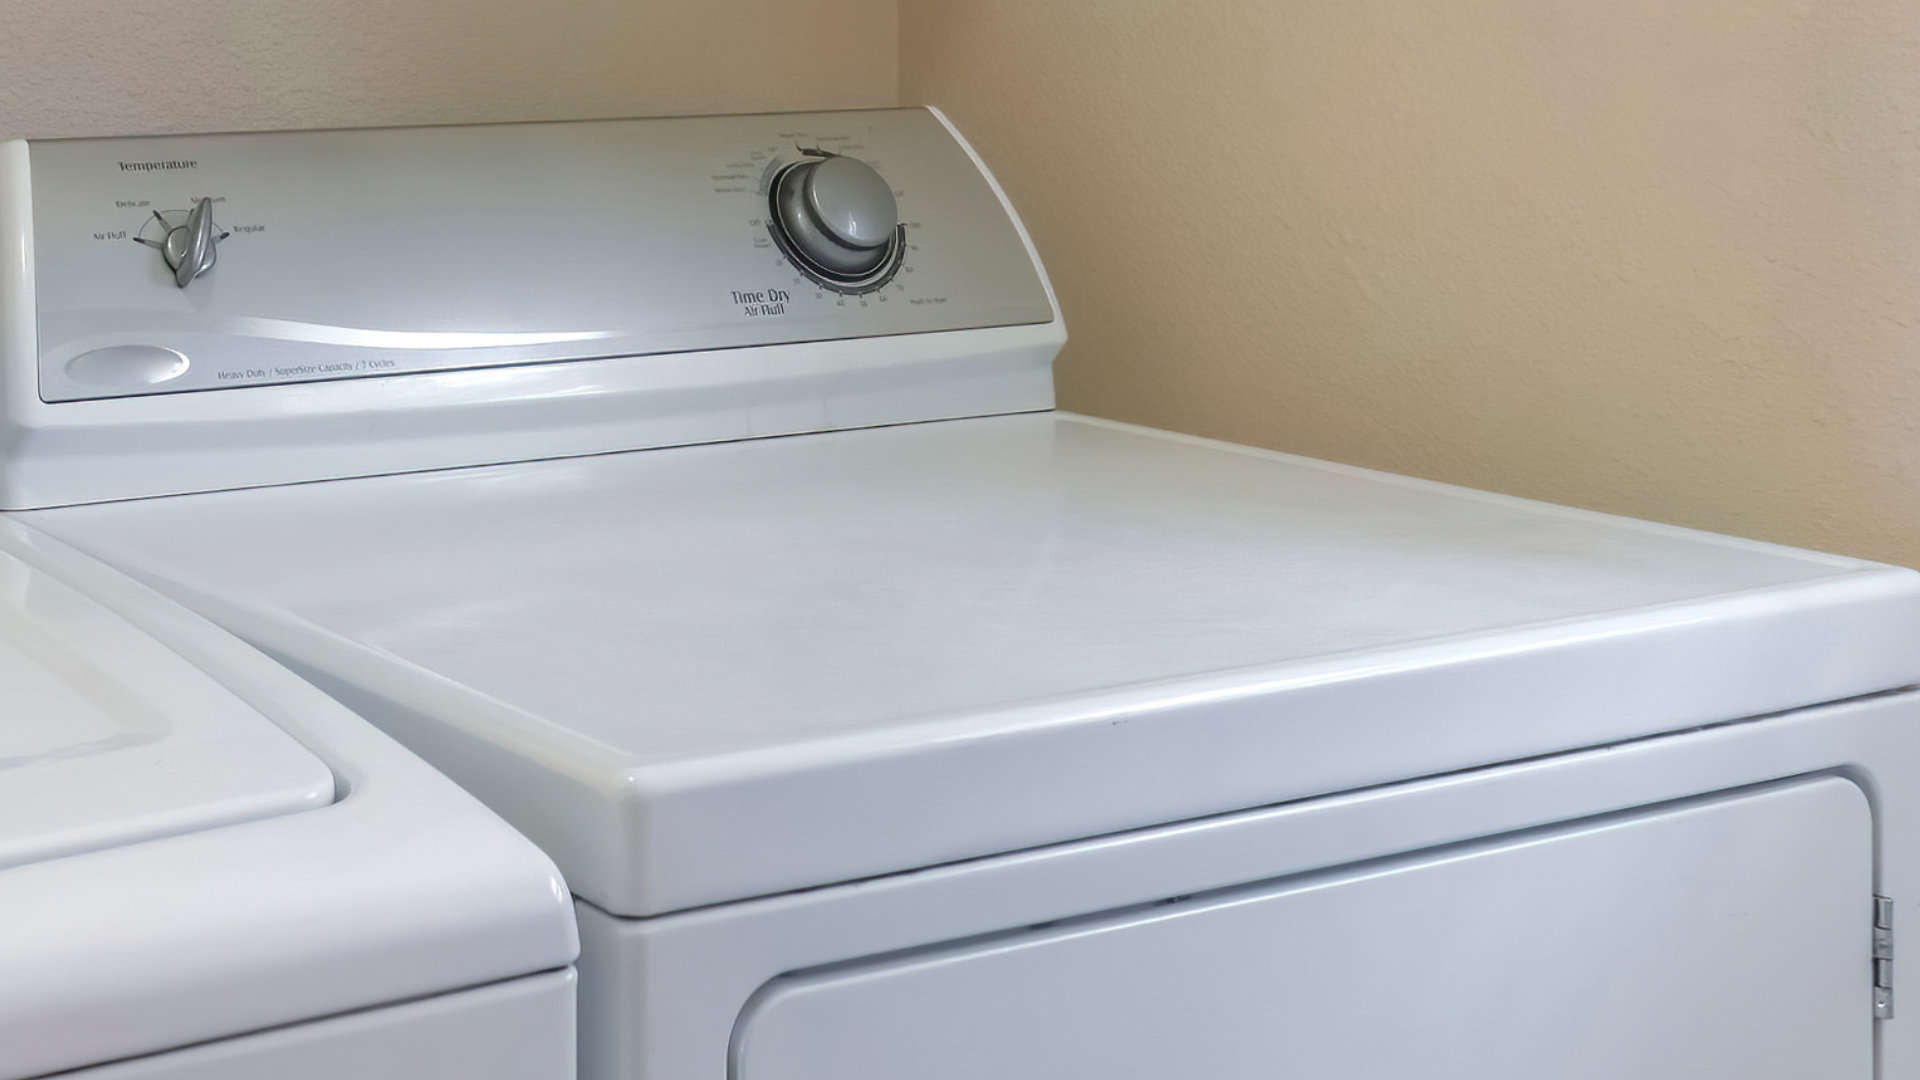 Featured image for “Maytag Dryer Not Heating? Here’s How to Fix It”